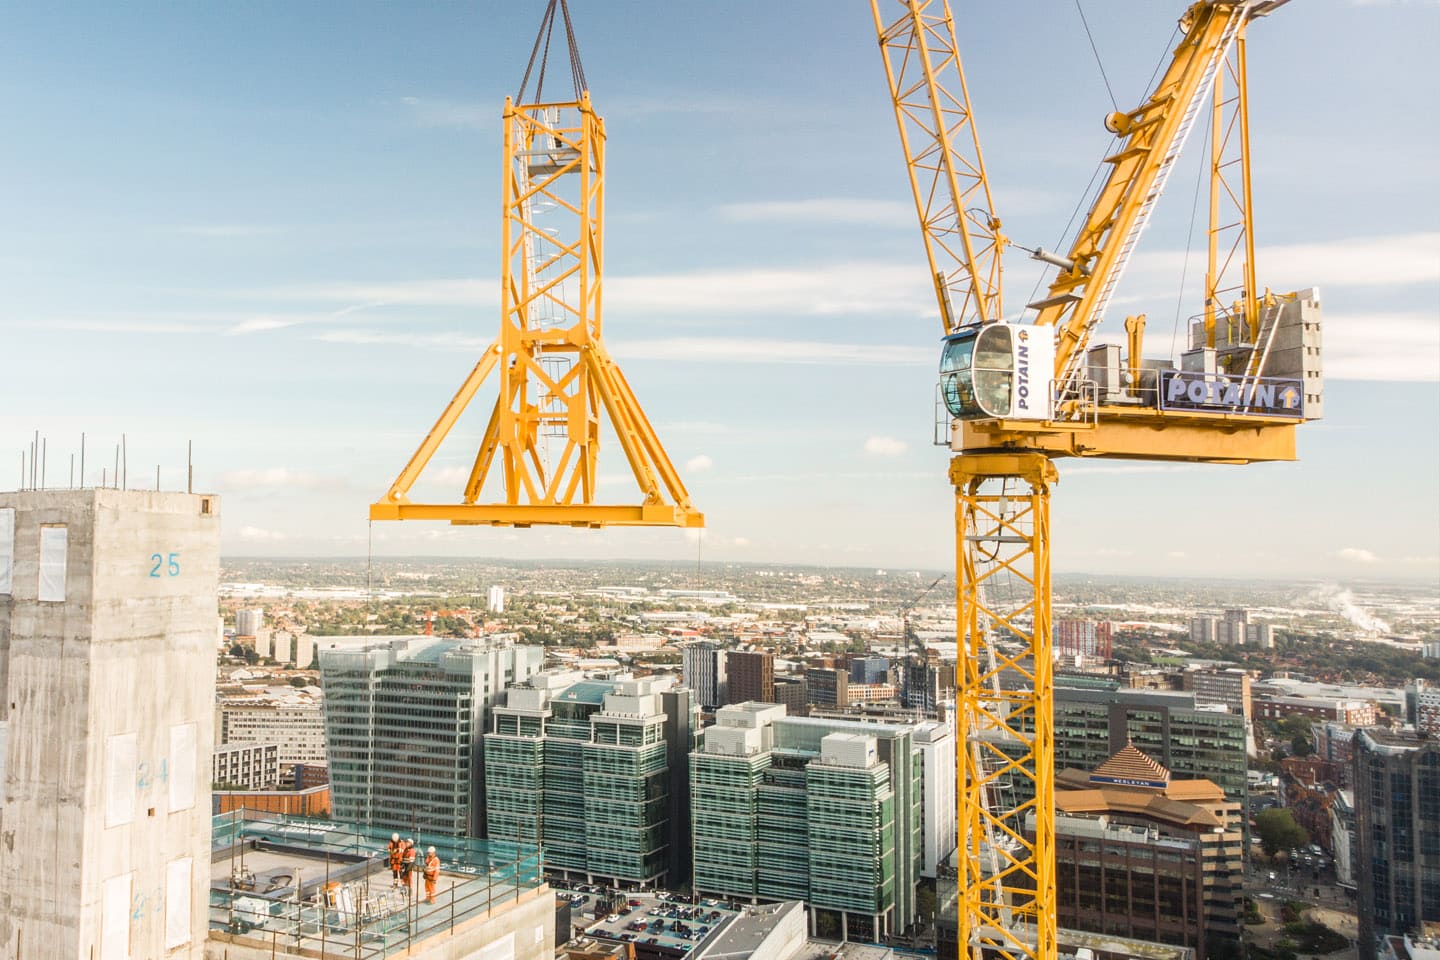 Crane Accidents In The Workplace